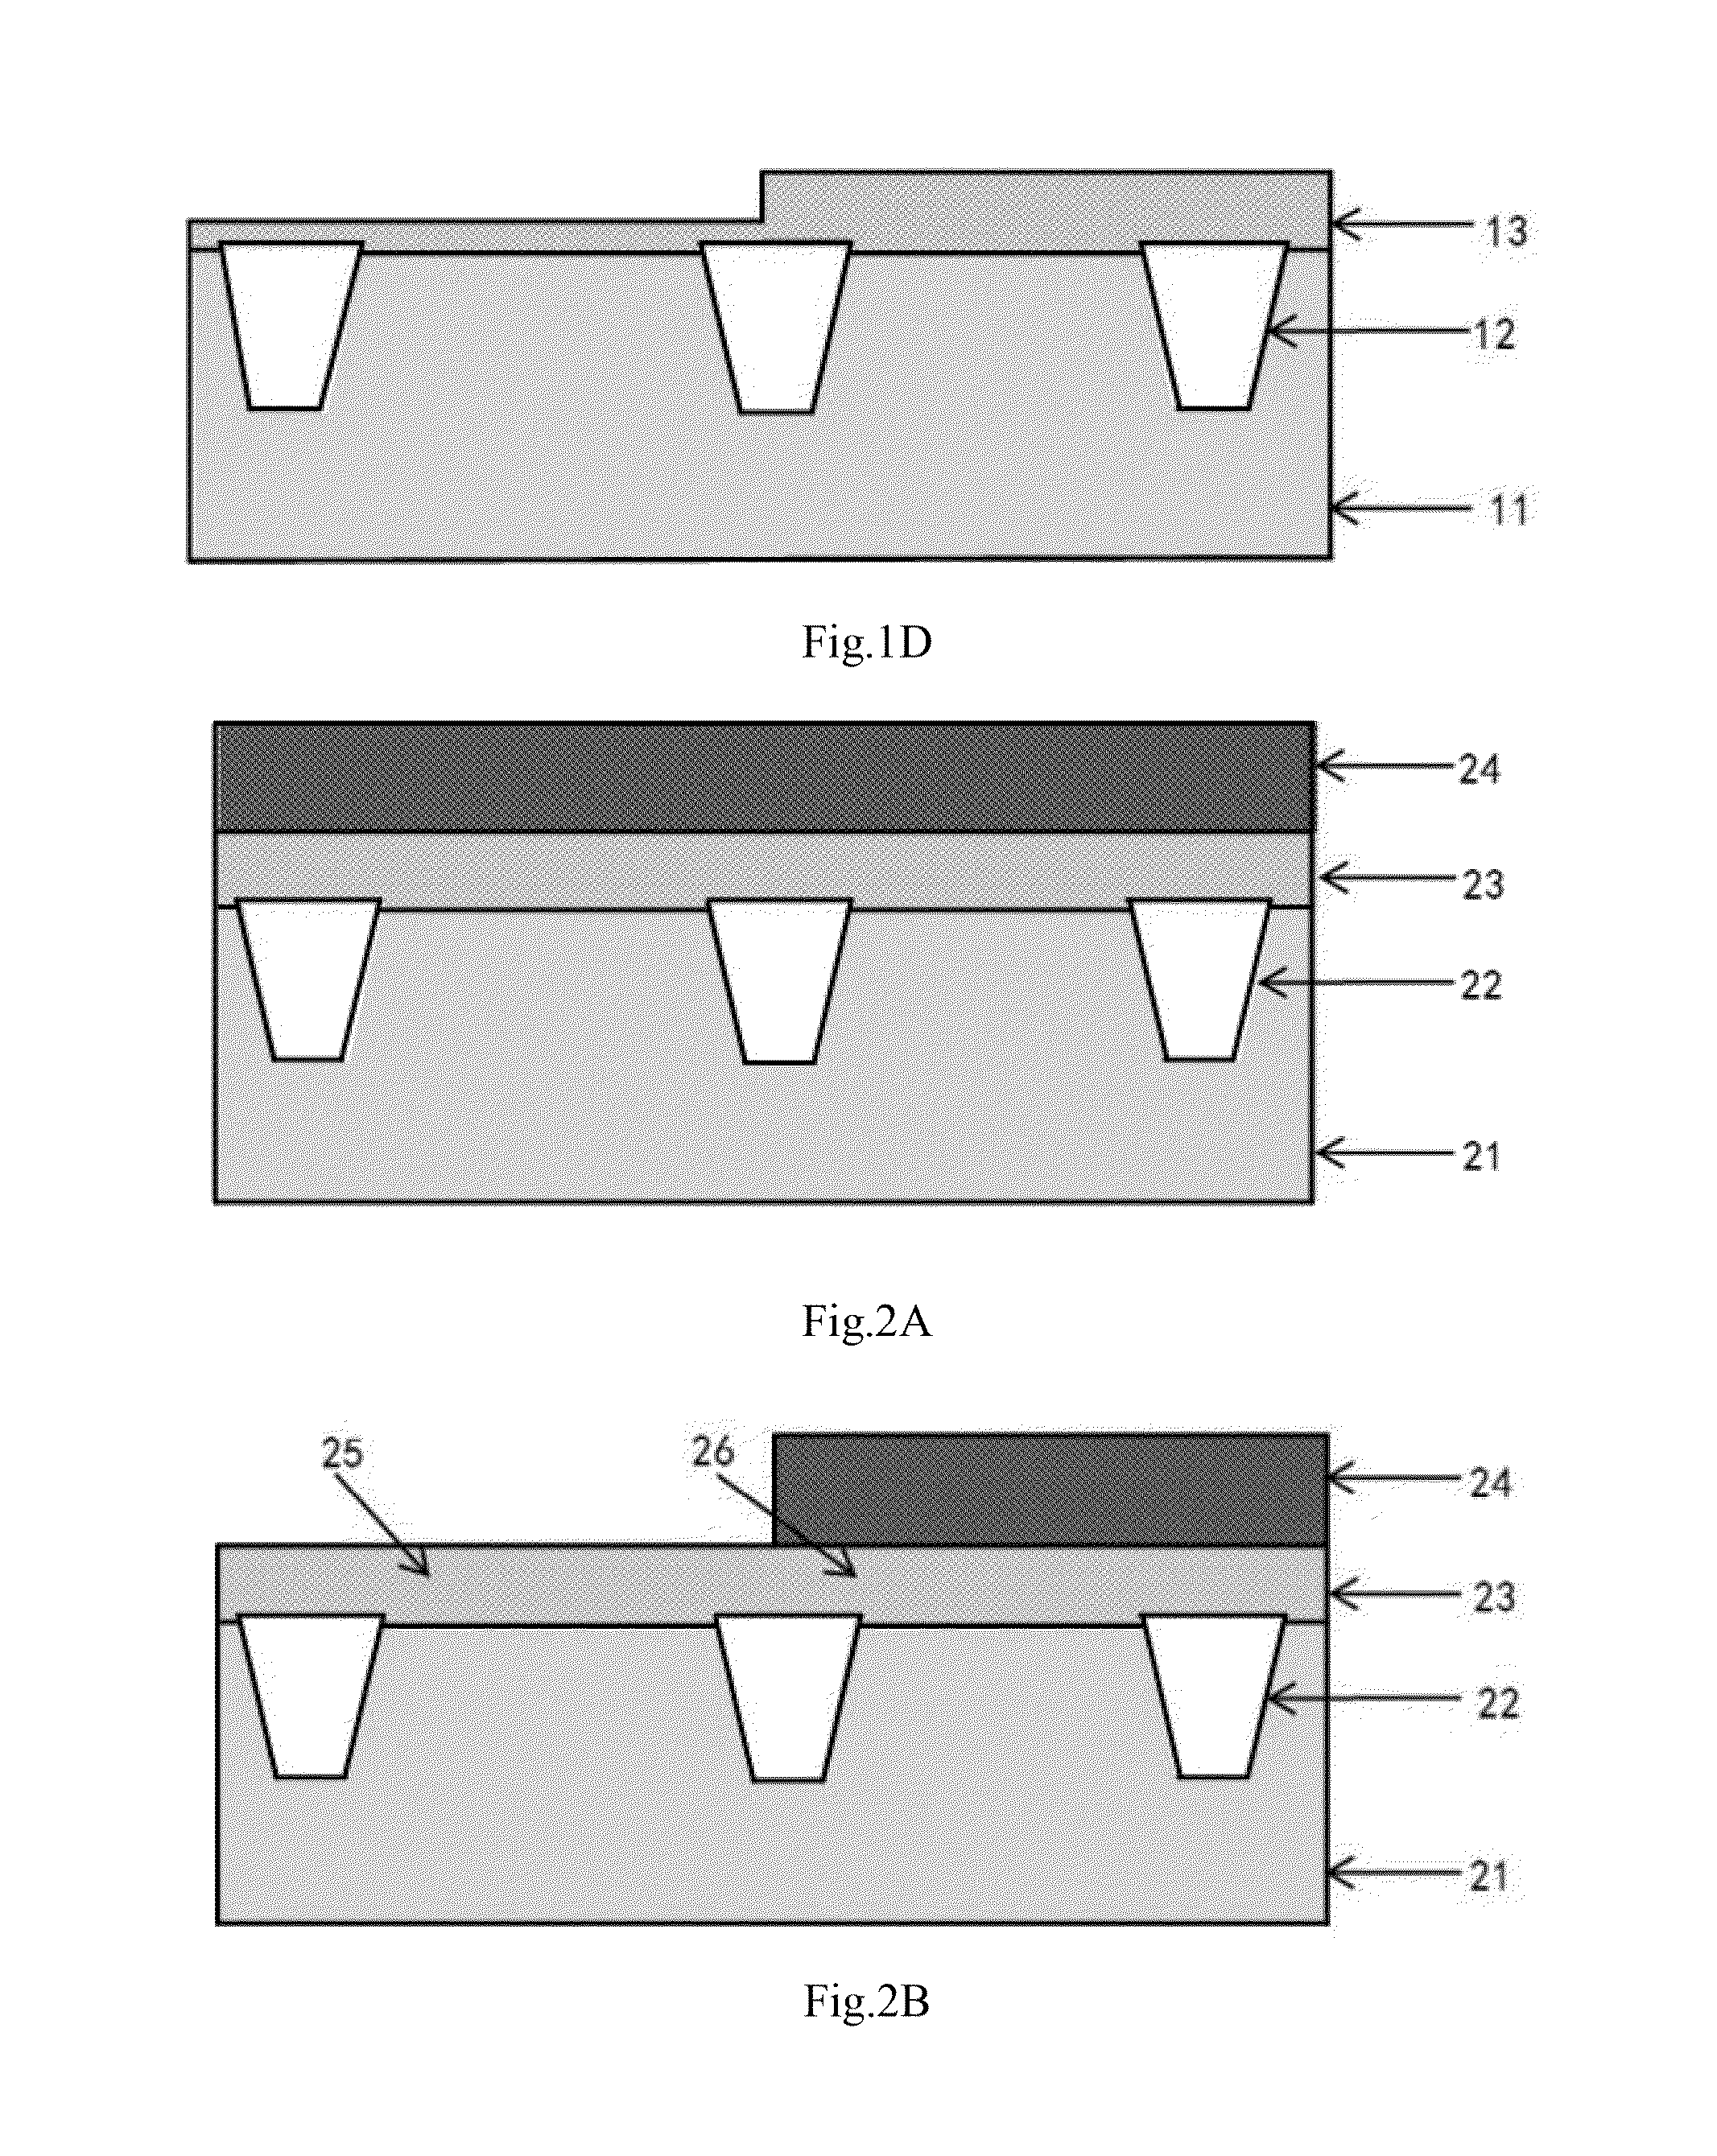 Method of manufacturing dual gate oxide devices